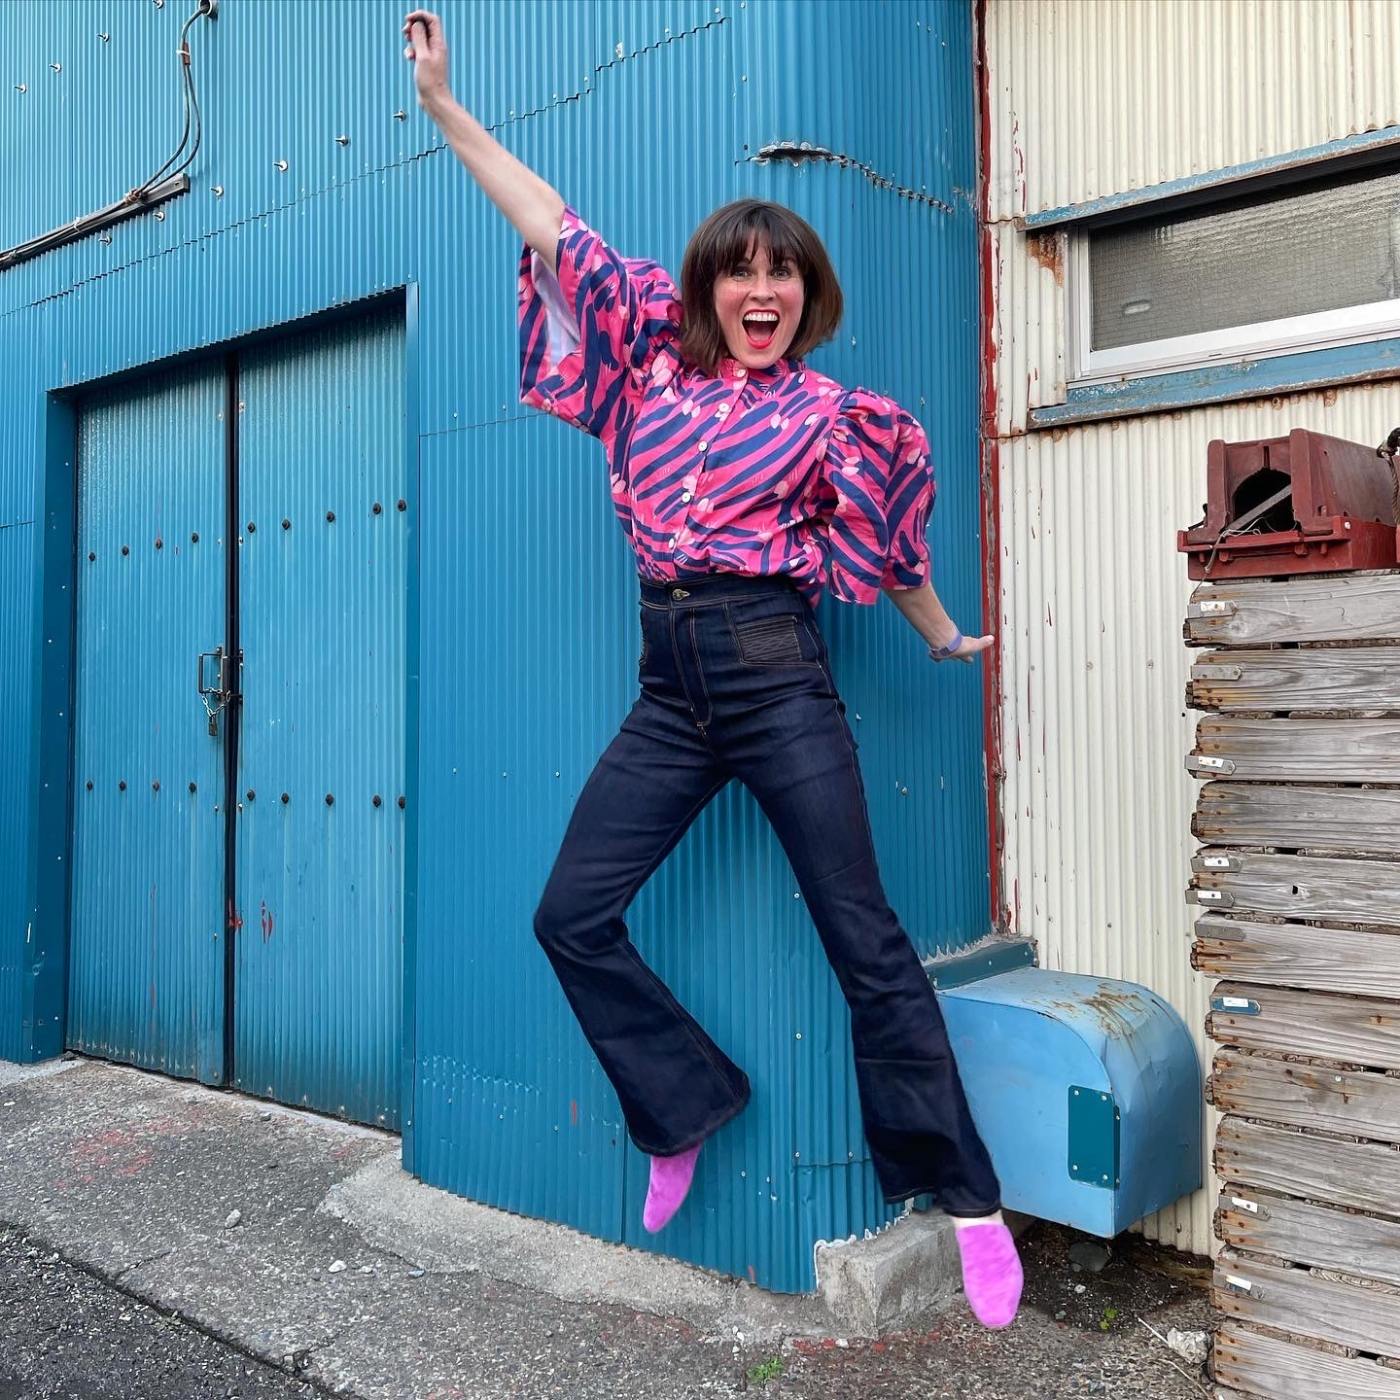 Katie is jumping in the air, with her right arm extended to the right and upward and her left arm facing left and downward. She is wearing a button-up shirt with billowy short sleeves that has a hot pink background and short purple stripes connected by white dots. The pants are high-waisted jeans. Her shoes are hot pink pumps and she is standing at the edge of a bright blue industrial building, where it meets a cream industrial building.